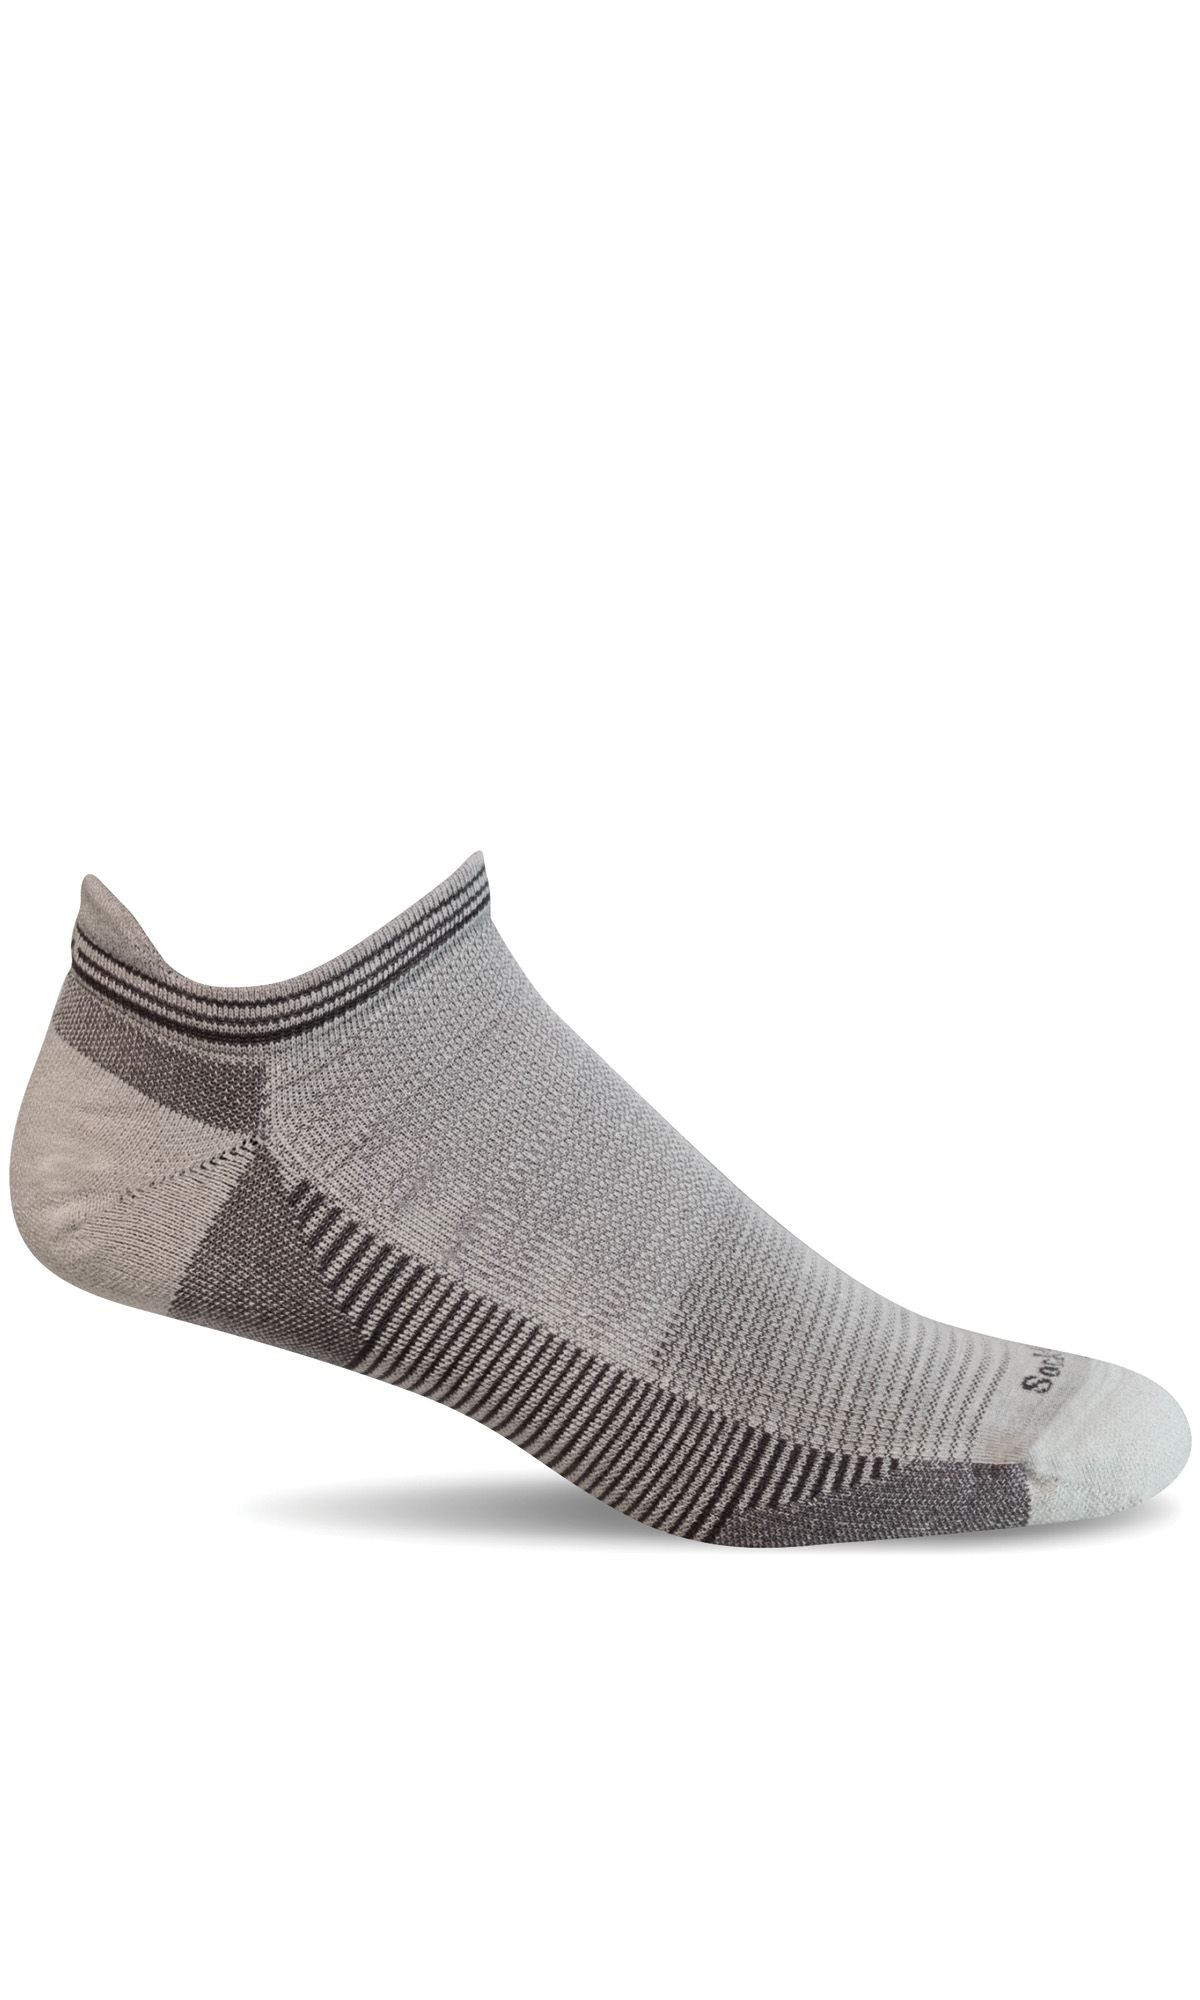 Sockwell Cadence Micro Moderate Compression Socks (Men's)